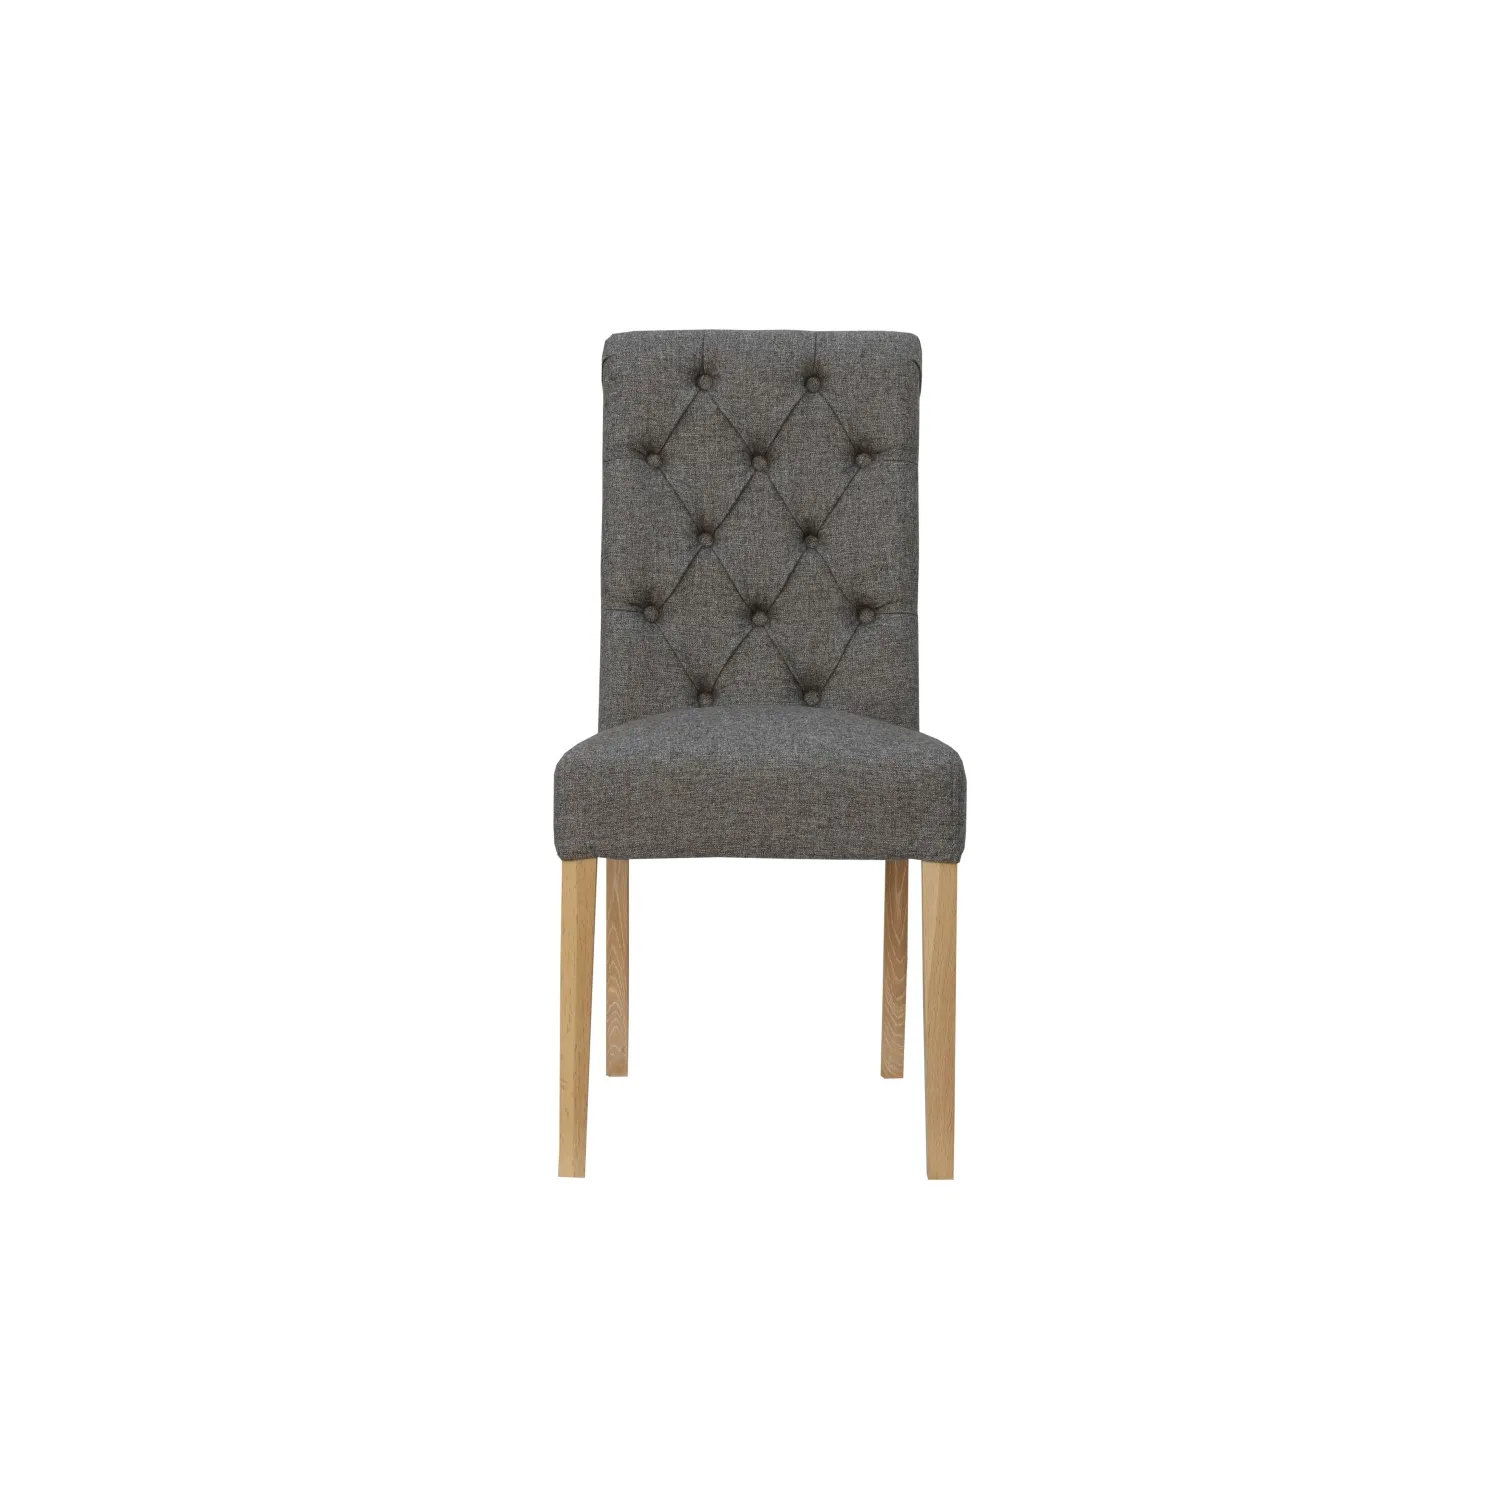 Button Back Chair with Scroll Top Dark Grey